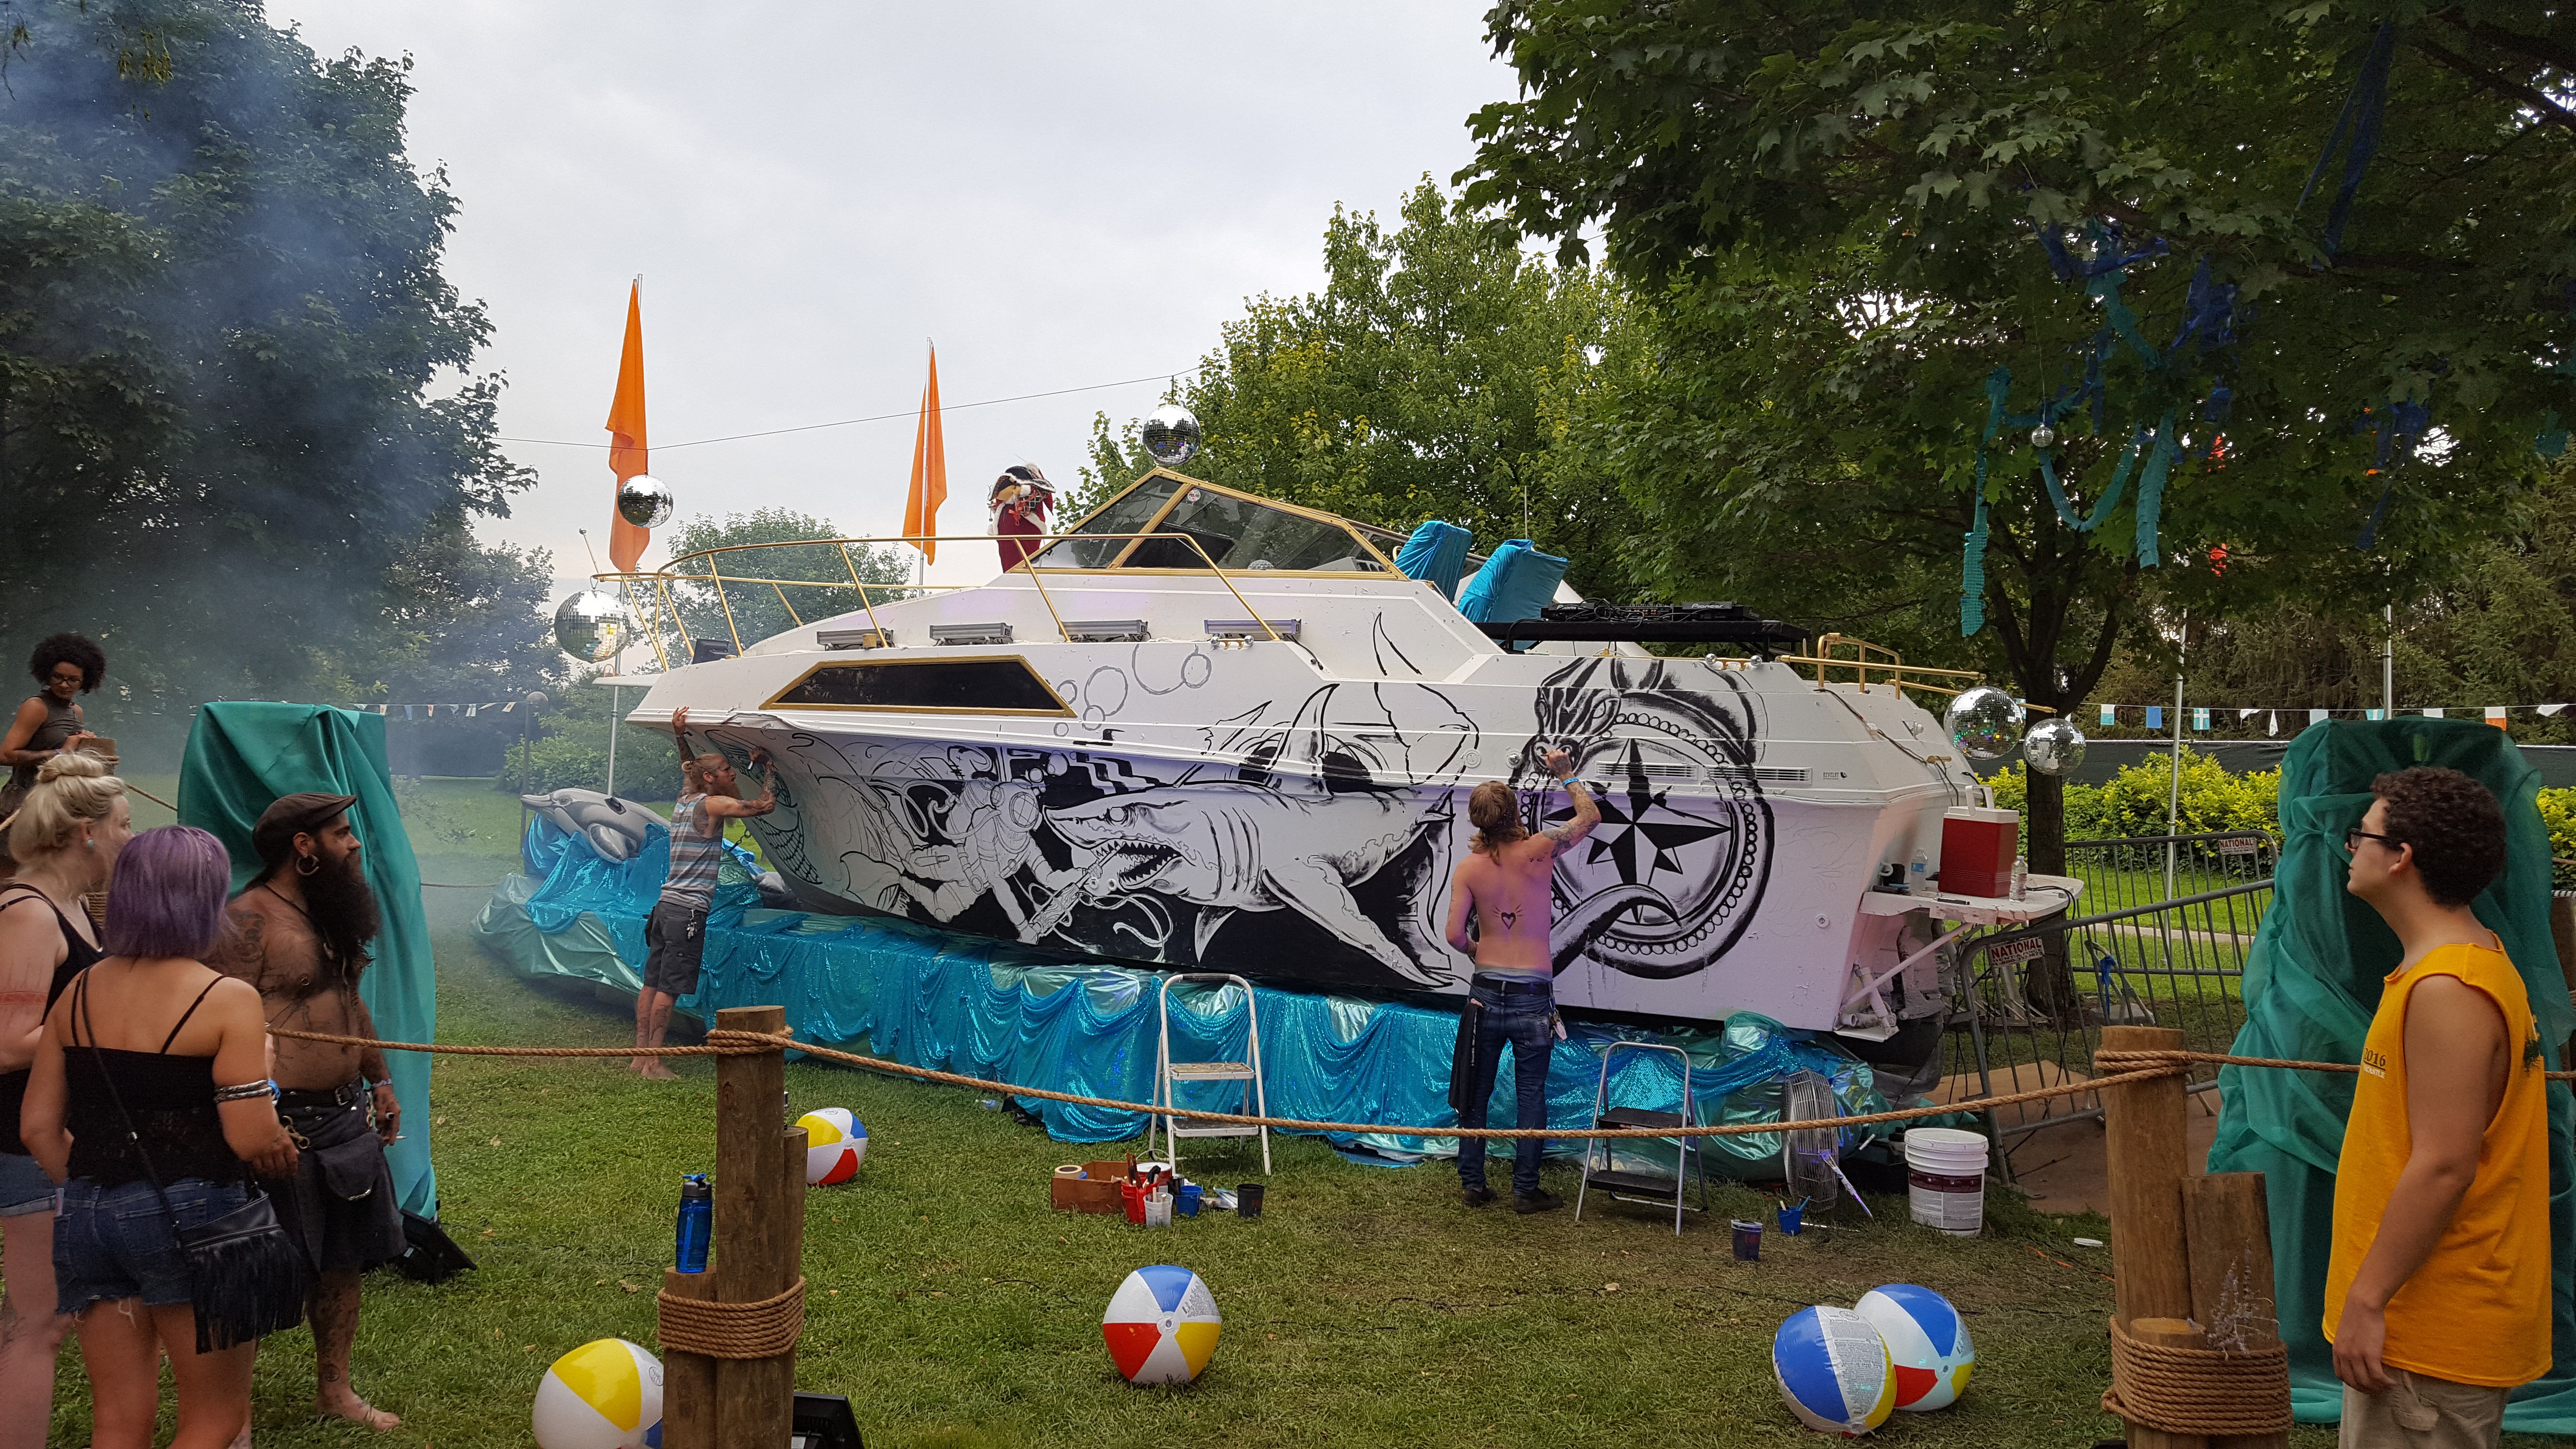 Artists continually add to the Art Boat in the Party Cove